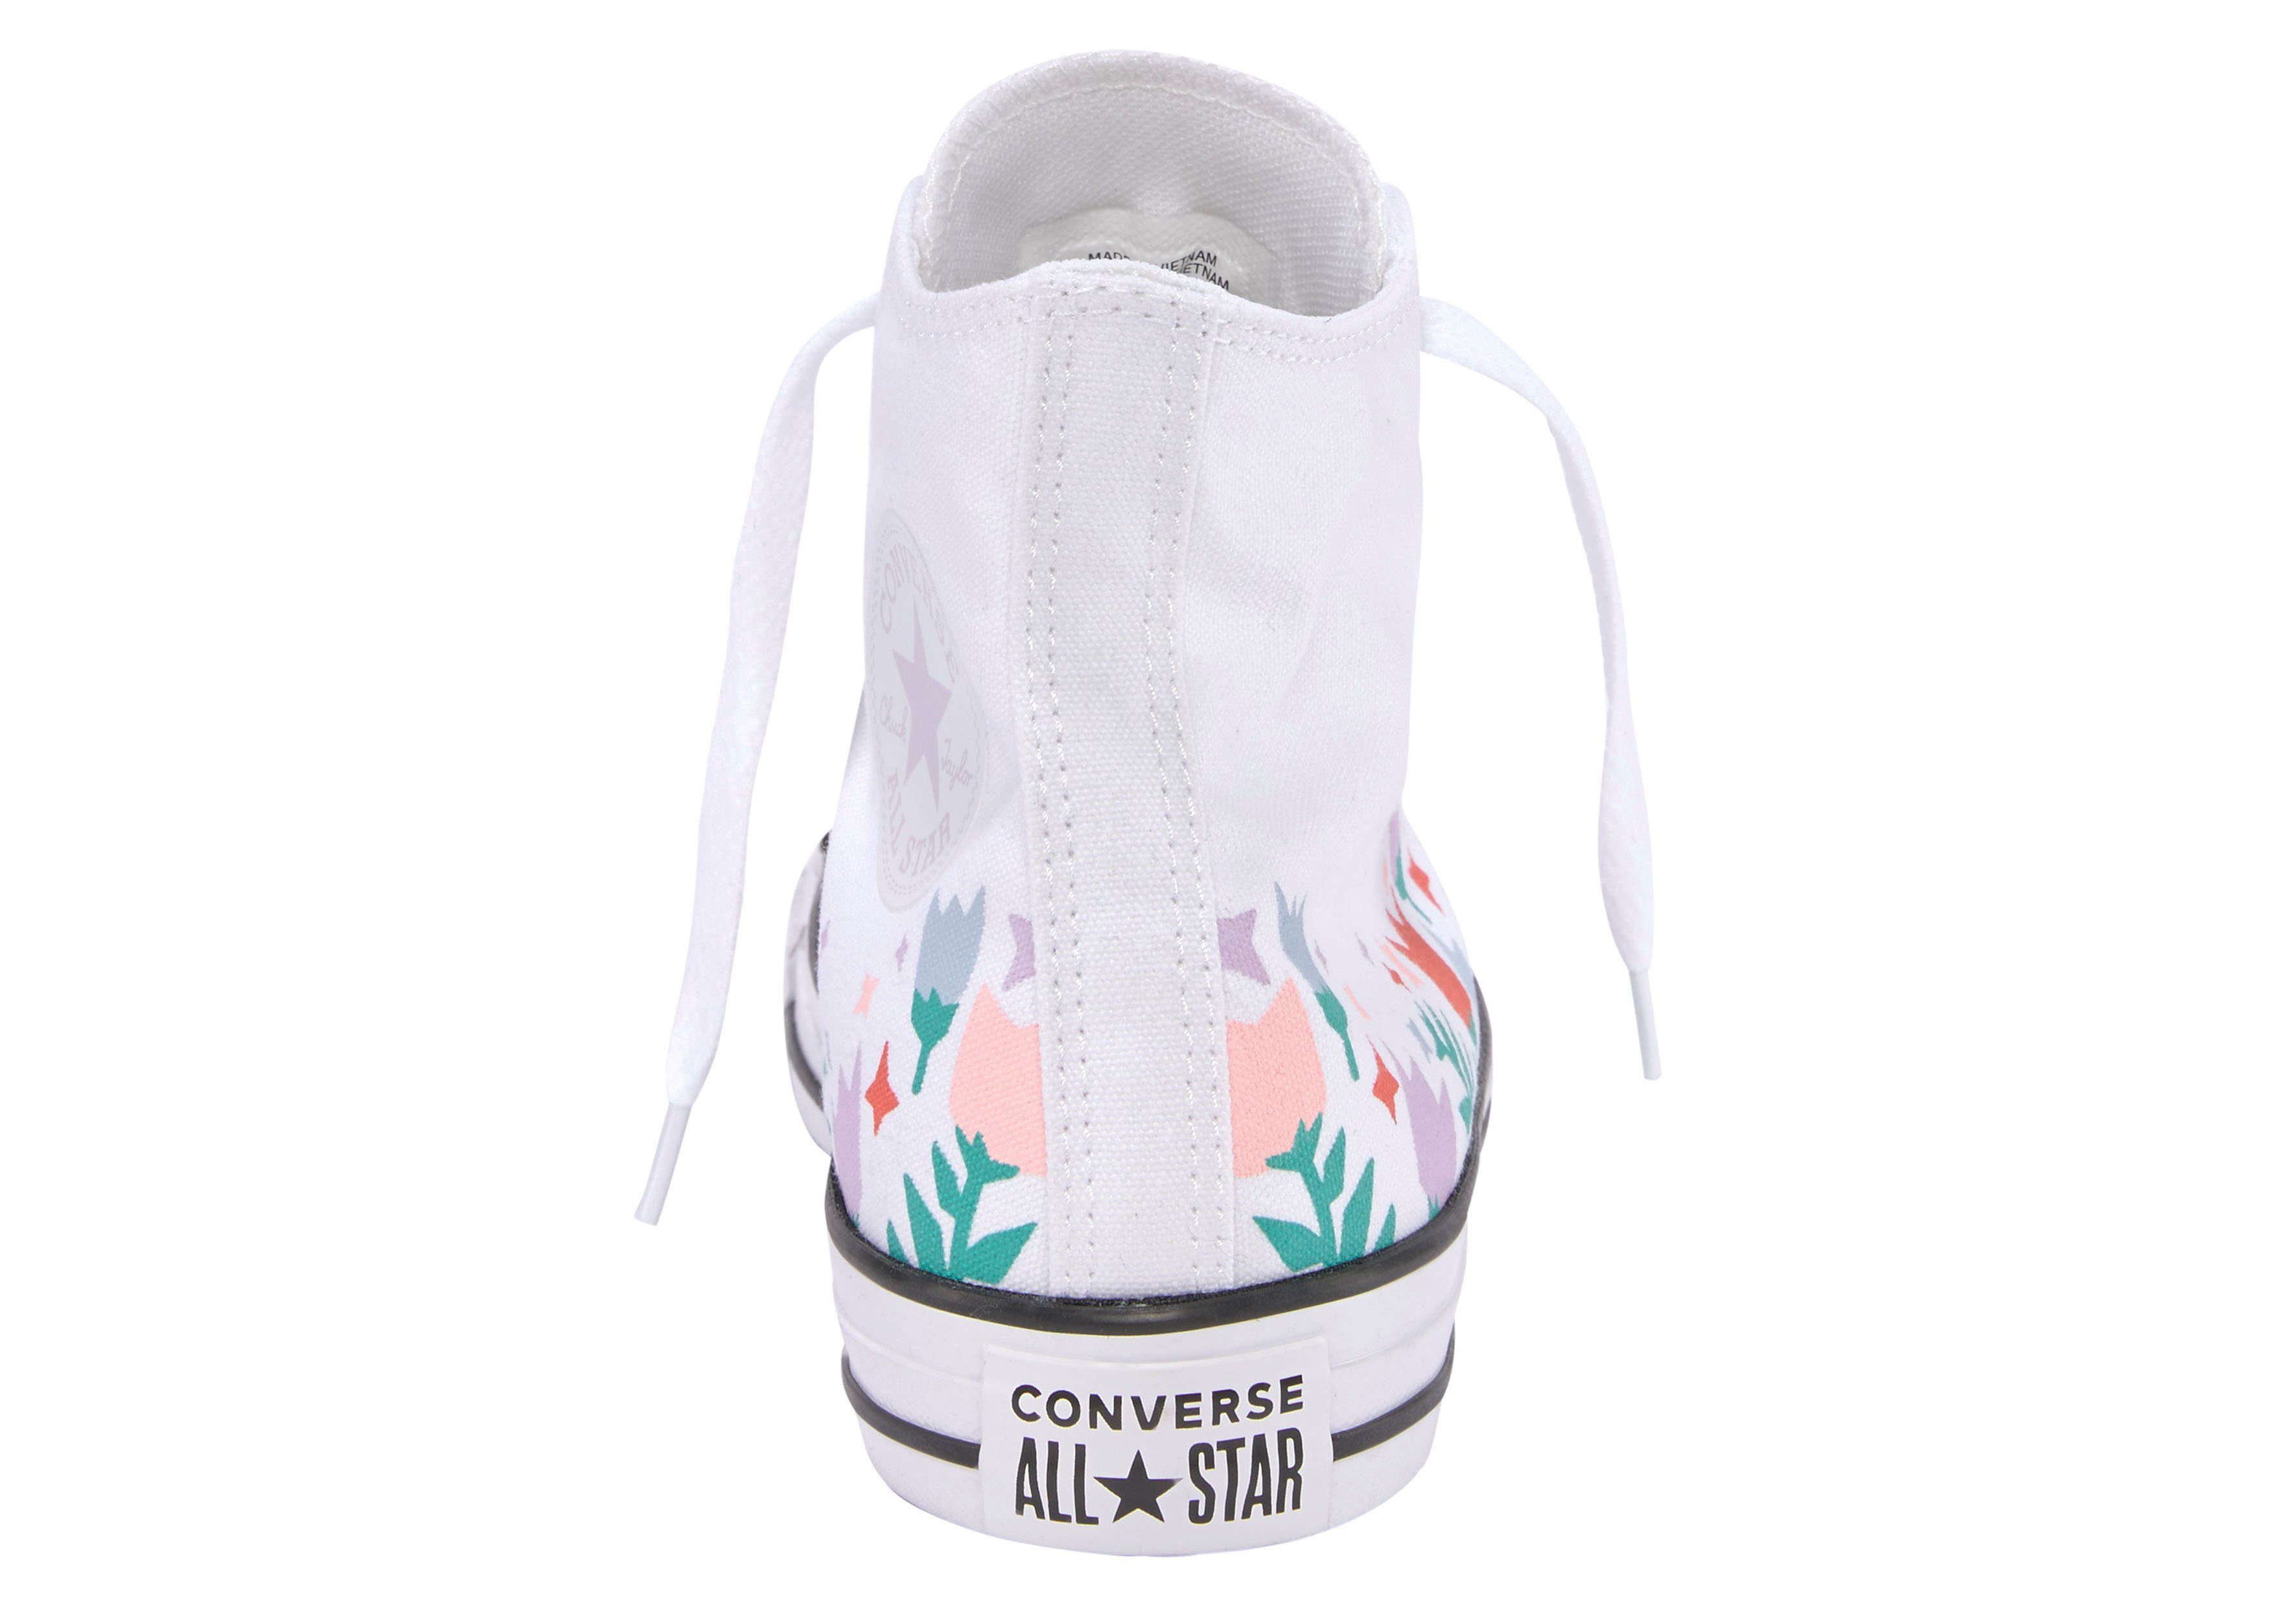 Schuhe Sneaker Converse CHUCK TAYLOR ALL STAR CRAFTED FLORALS HI Sneaker